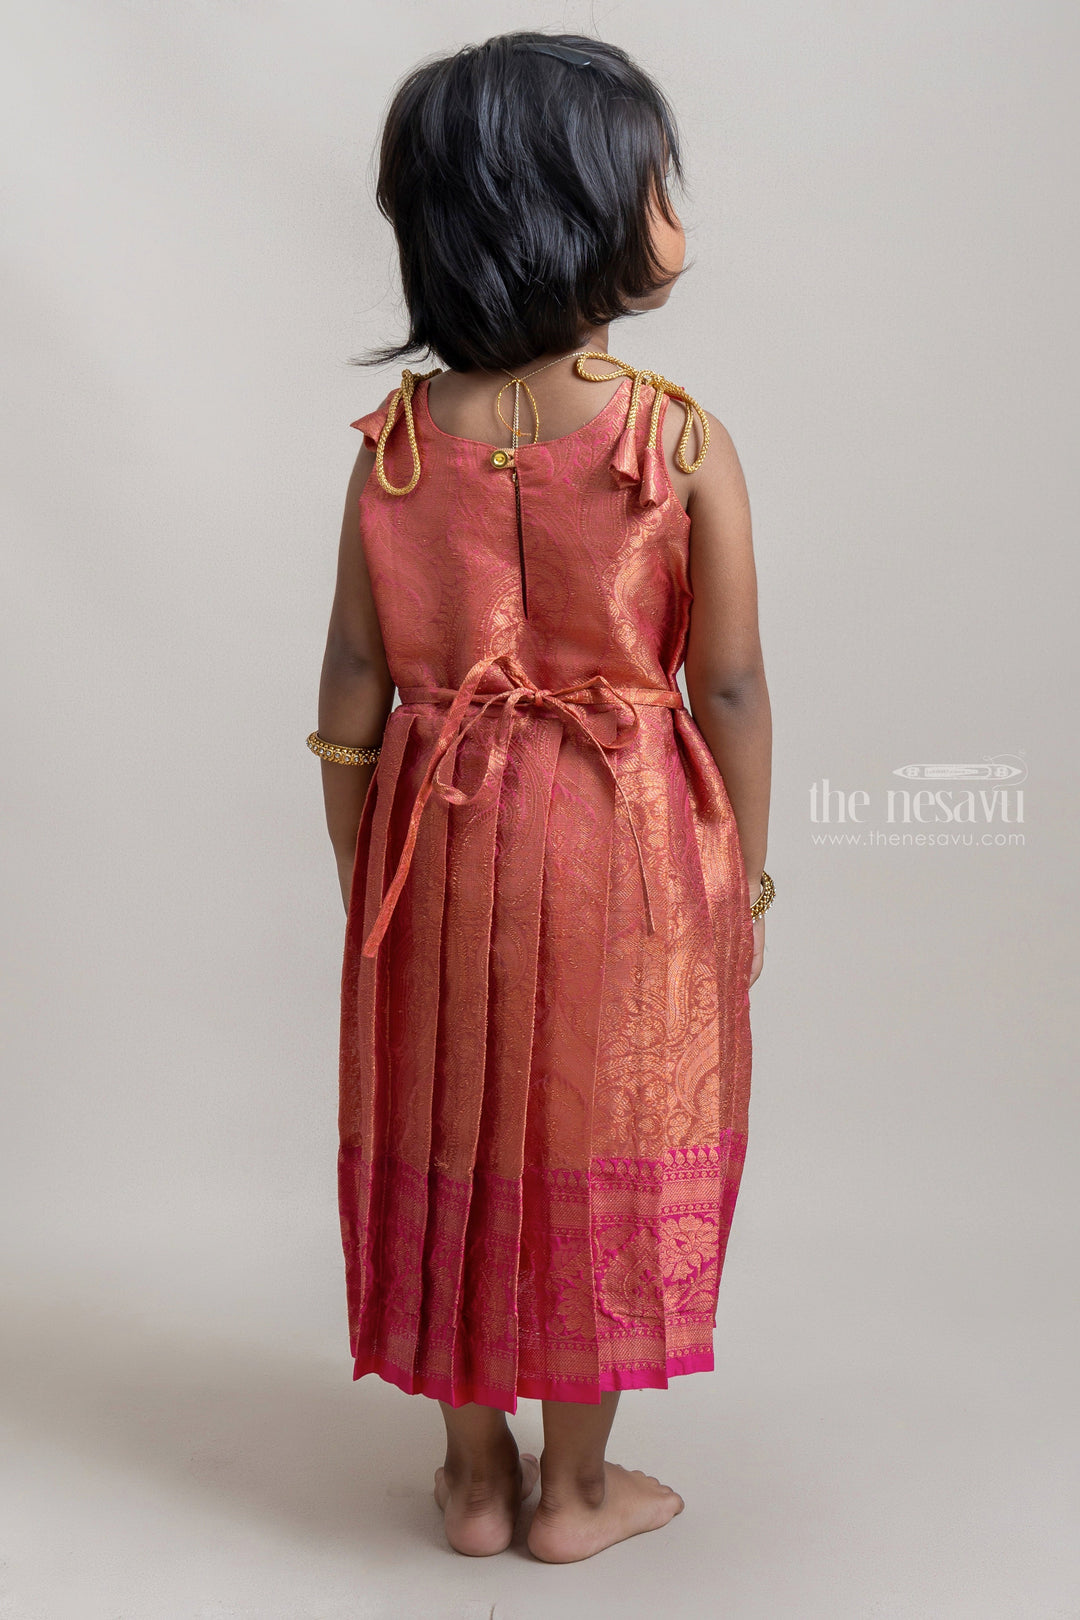 The Nesavu Tie-up Frock Gold And Pink Semi-Silk Tie-Up Frocks With Copper Toned Zari Border Nesavu Dynamic Tie-up Silk Frocks| Pattu Cheera Frocks| The Nesavu